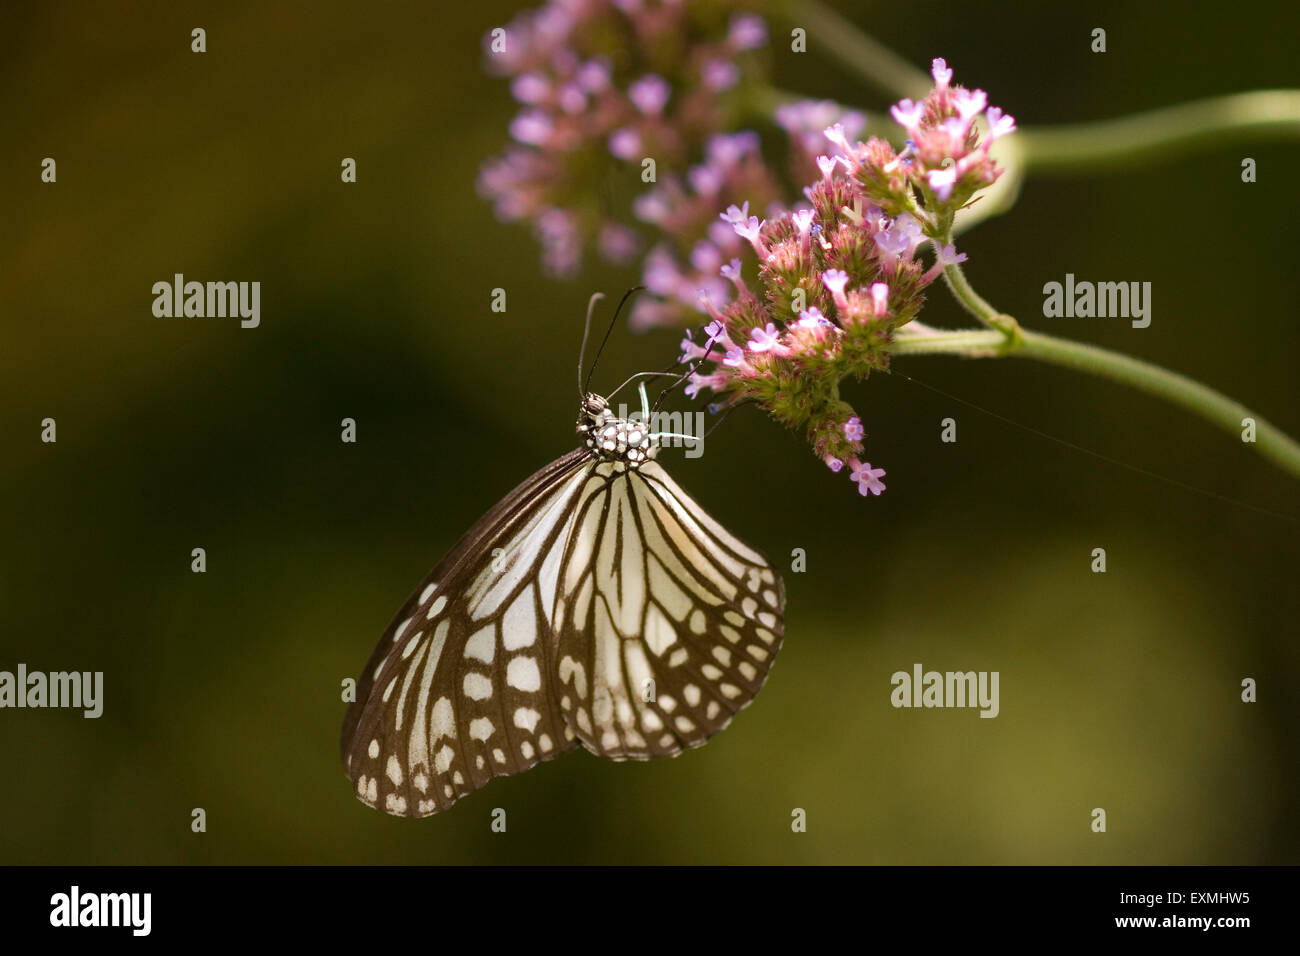 Butterfly on flower, chestnut tiger, India, Asia Stock Photo